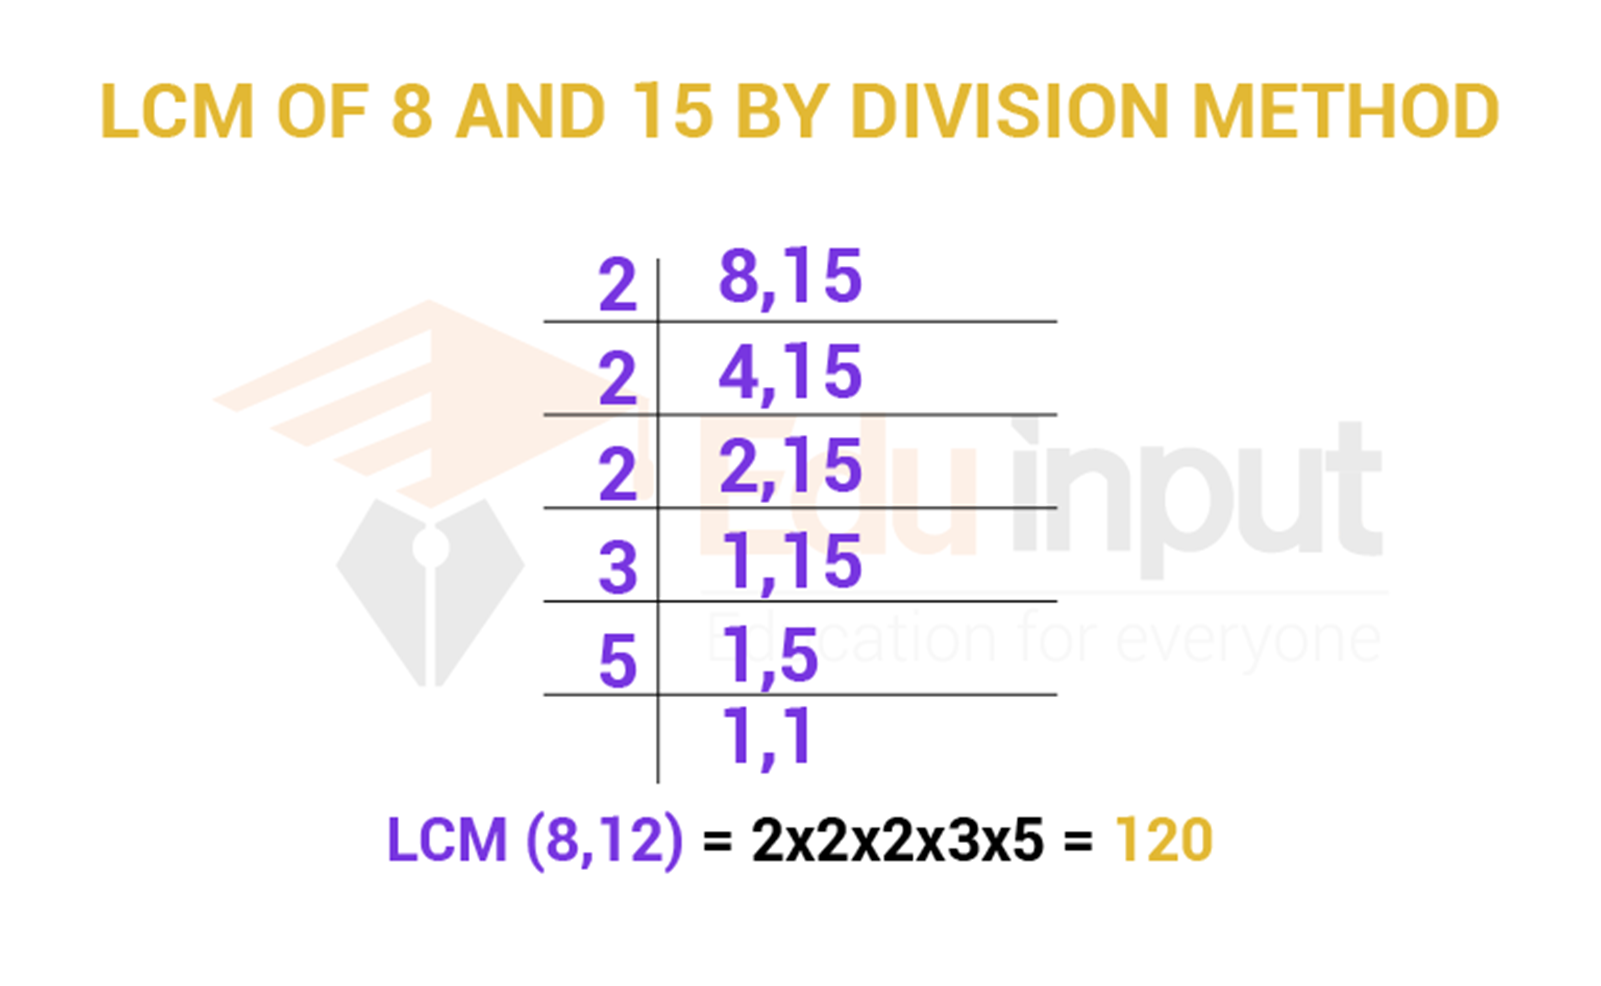 How to Find LCM by using the Division Method?